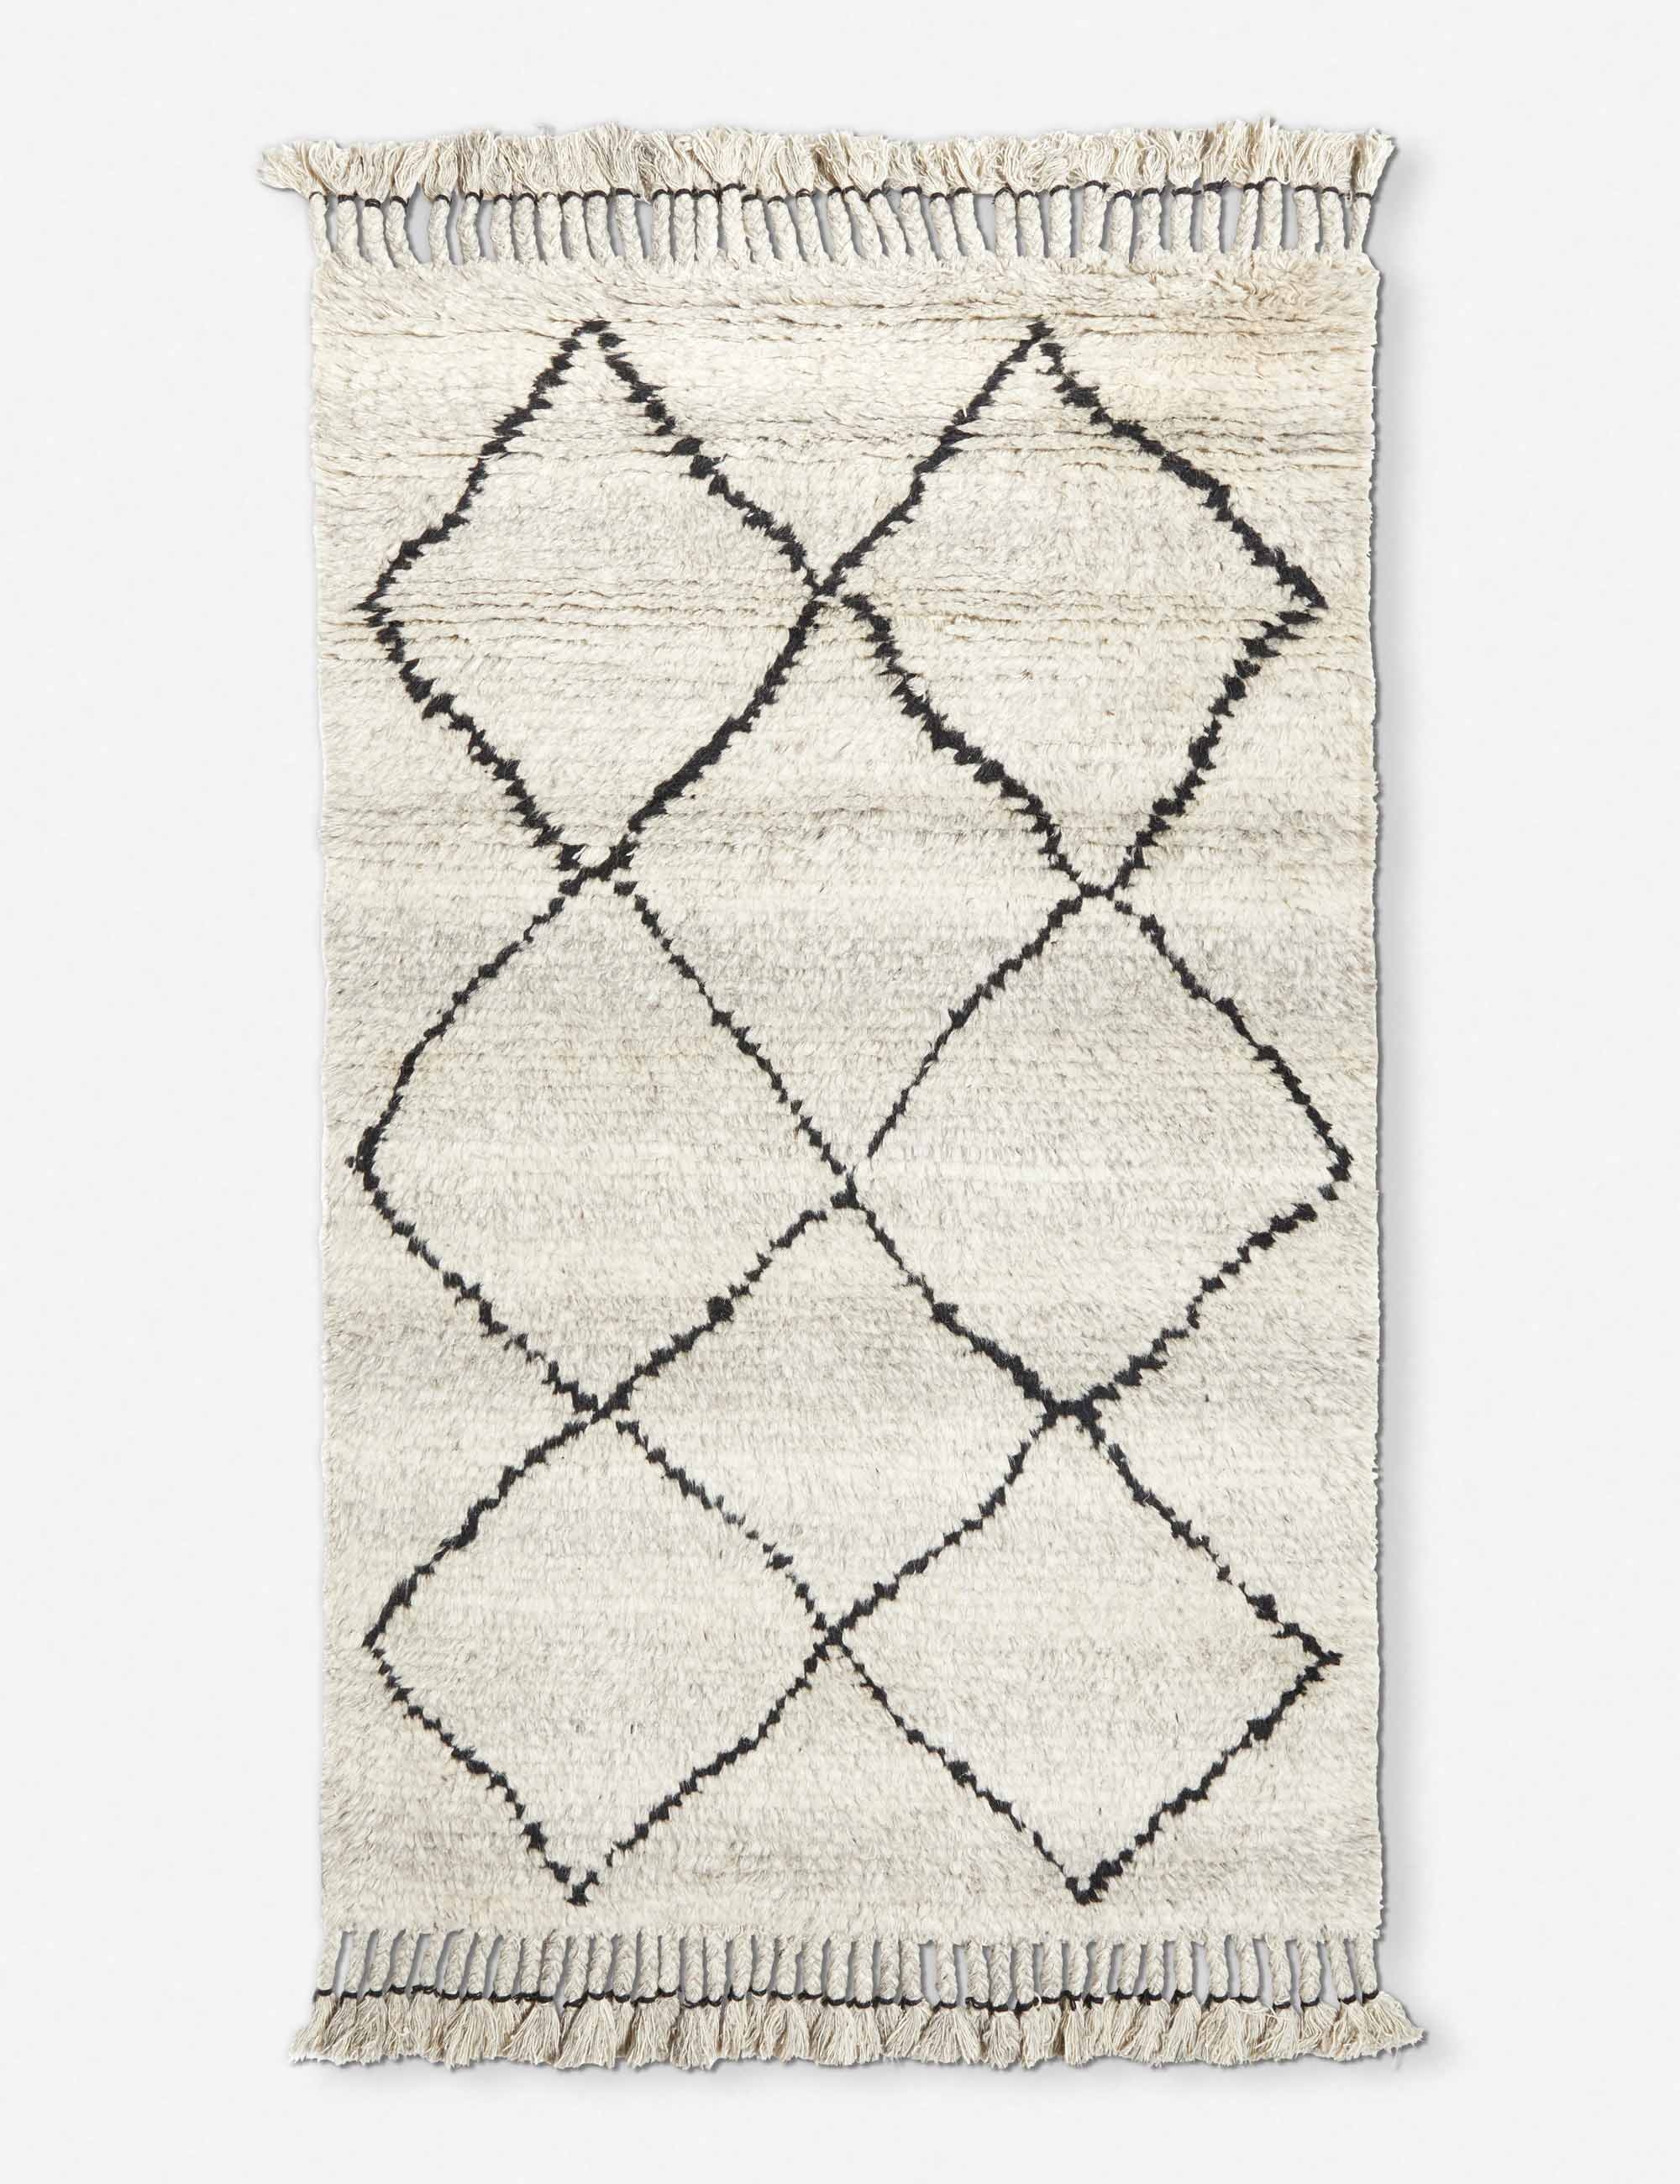 Aya Hand-Knotted Wool-Blend Moroccan Shag Rug - Image 5